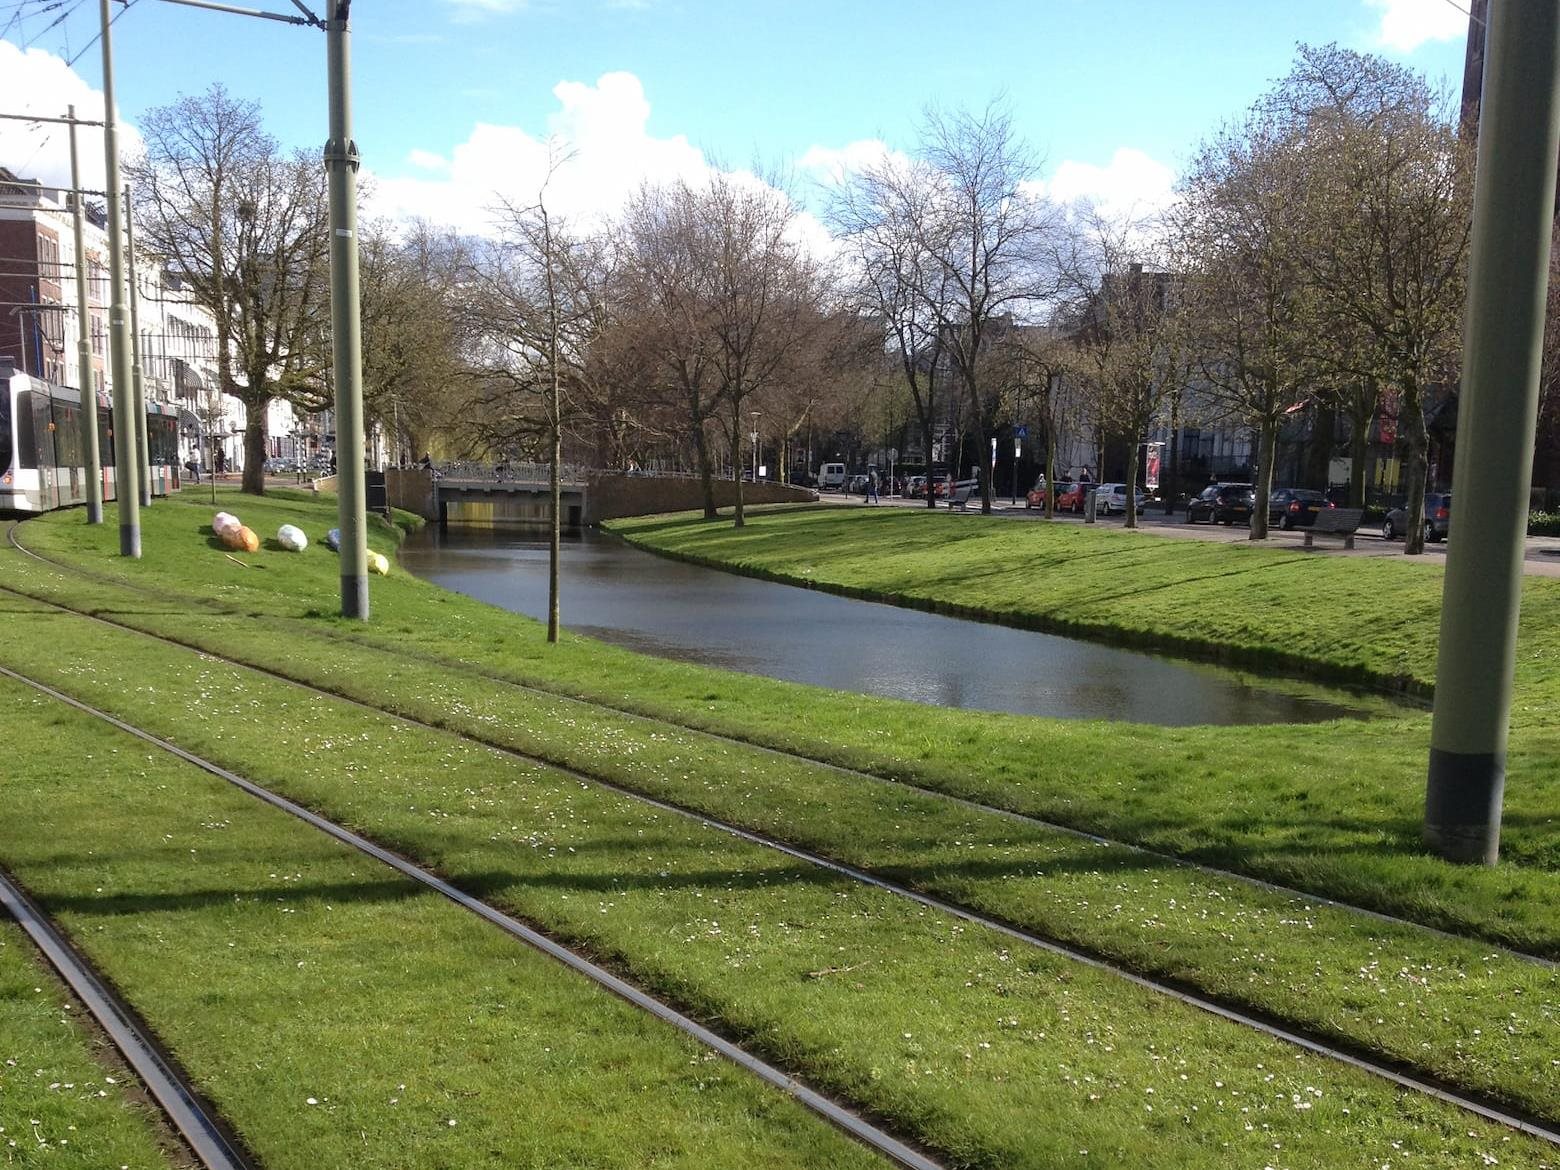 Green tram tracks in the central city area of Rotterdam, the Netherlands. Image: Emily O’Donnell